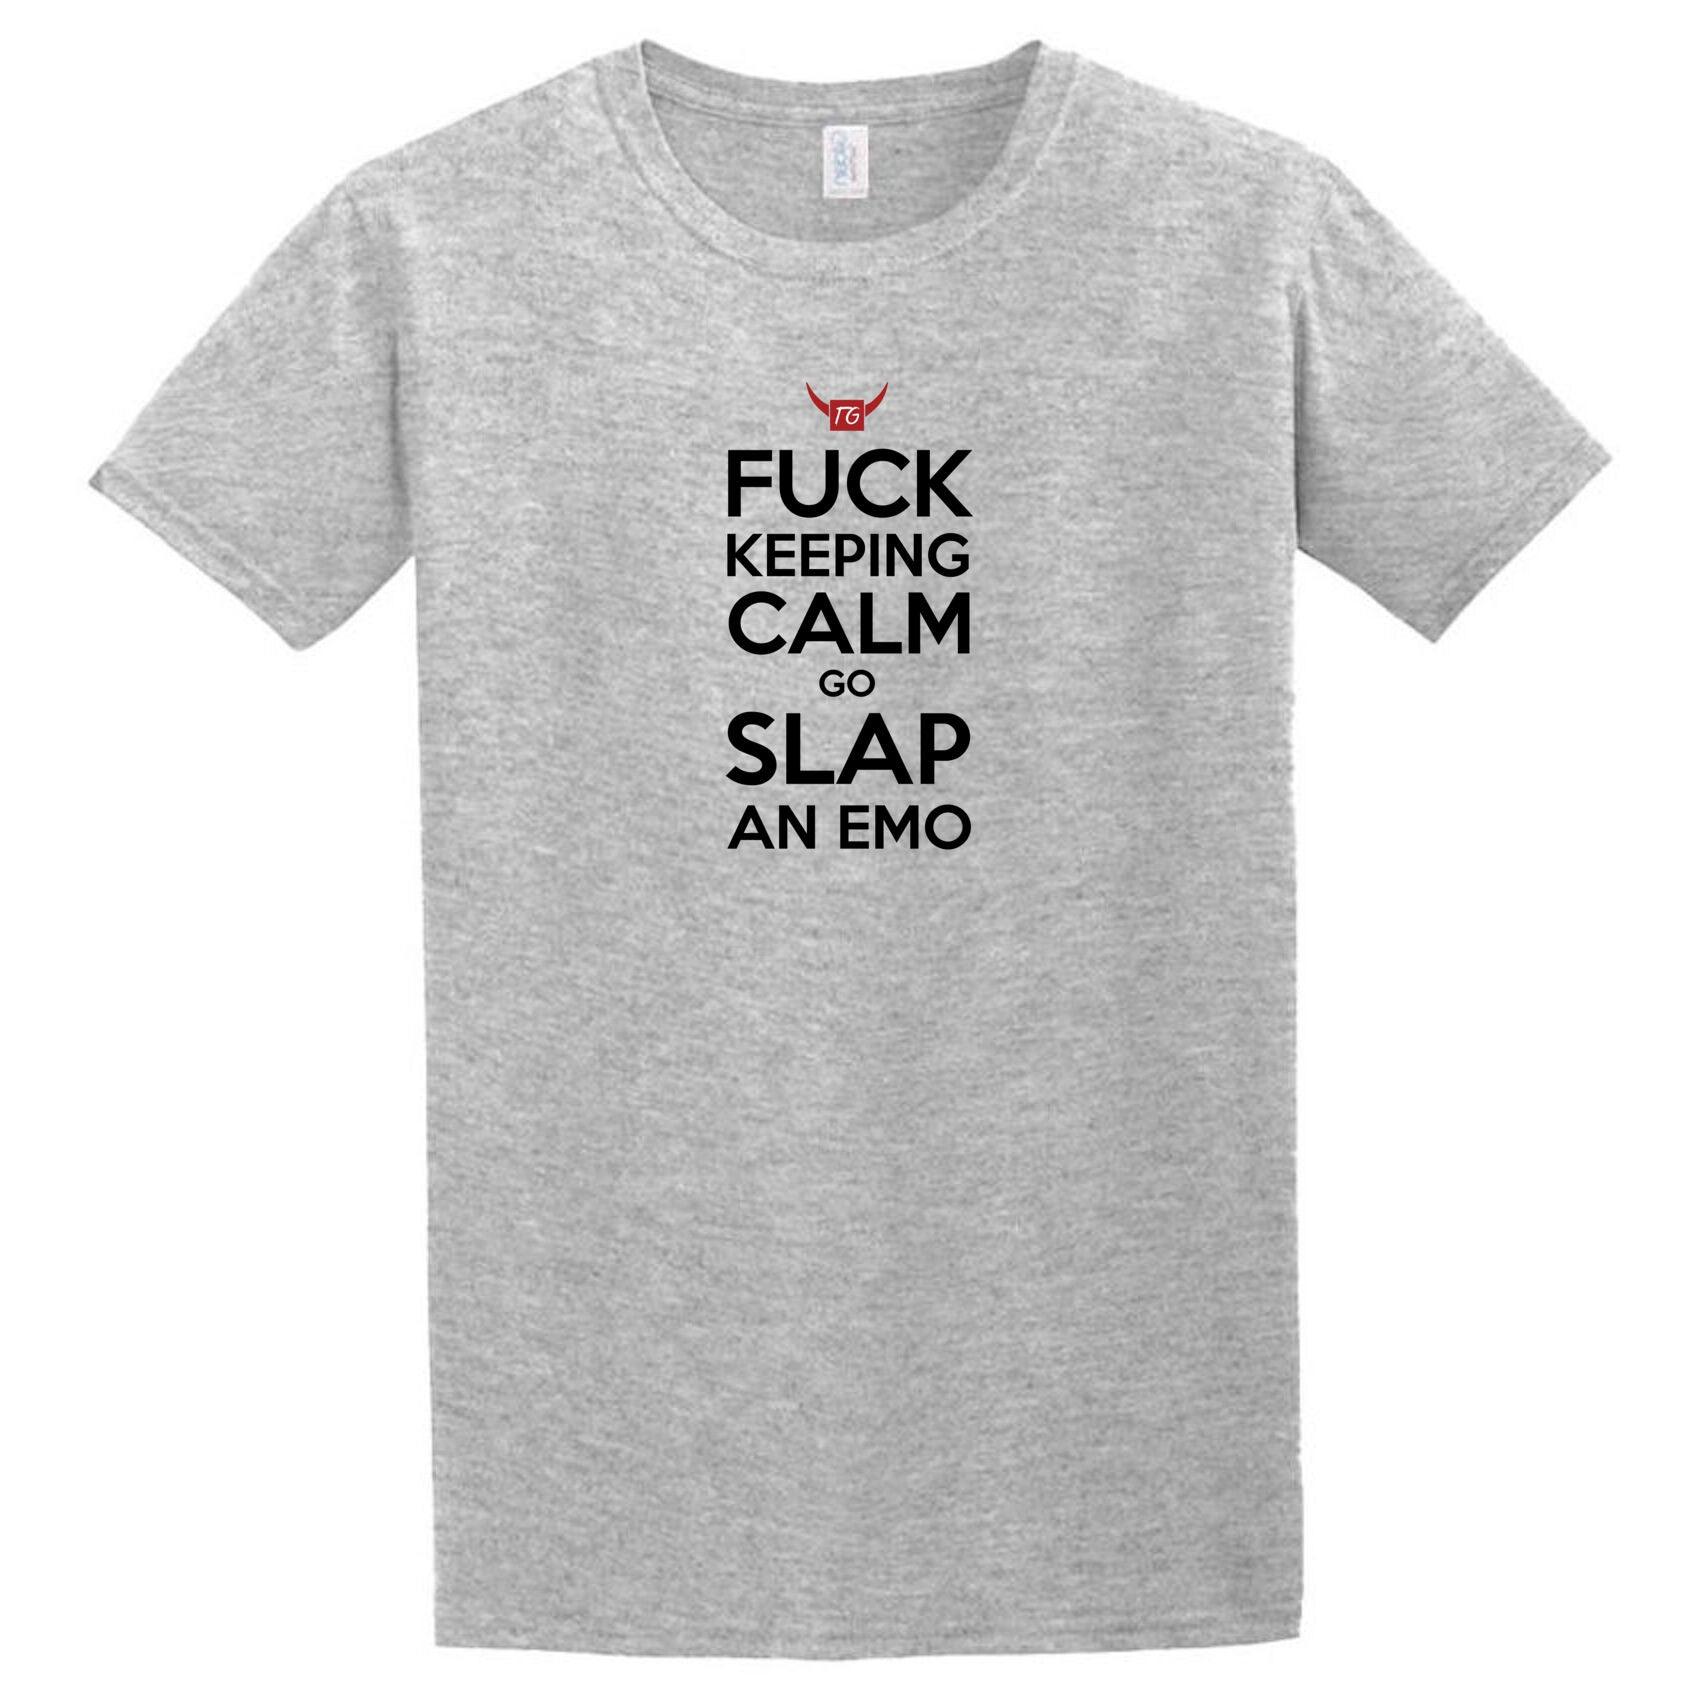 A Slap An Emo T-Shirt from Twisted Gifts that says fuck keeping calm and slap at emo.